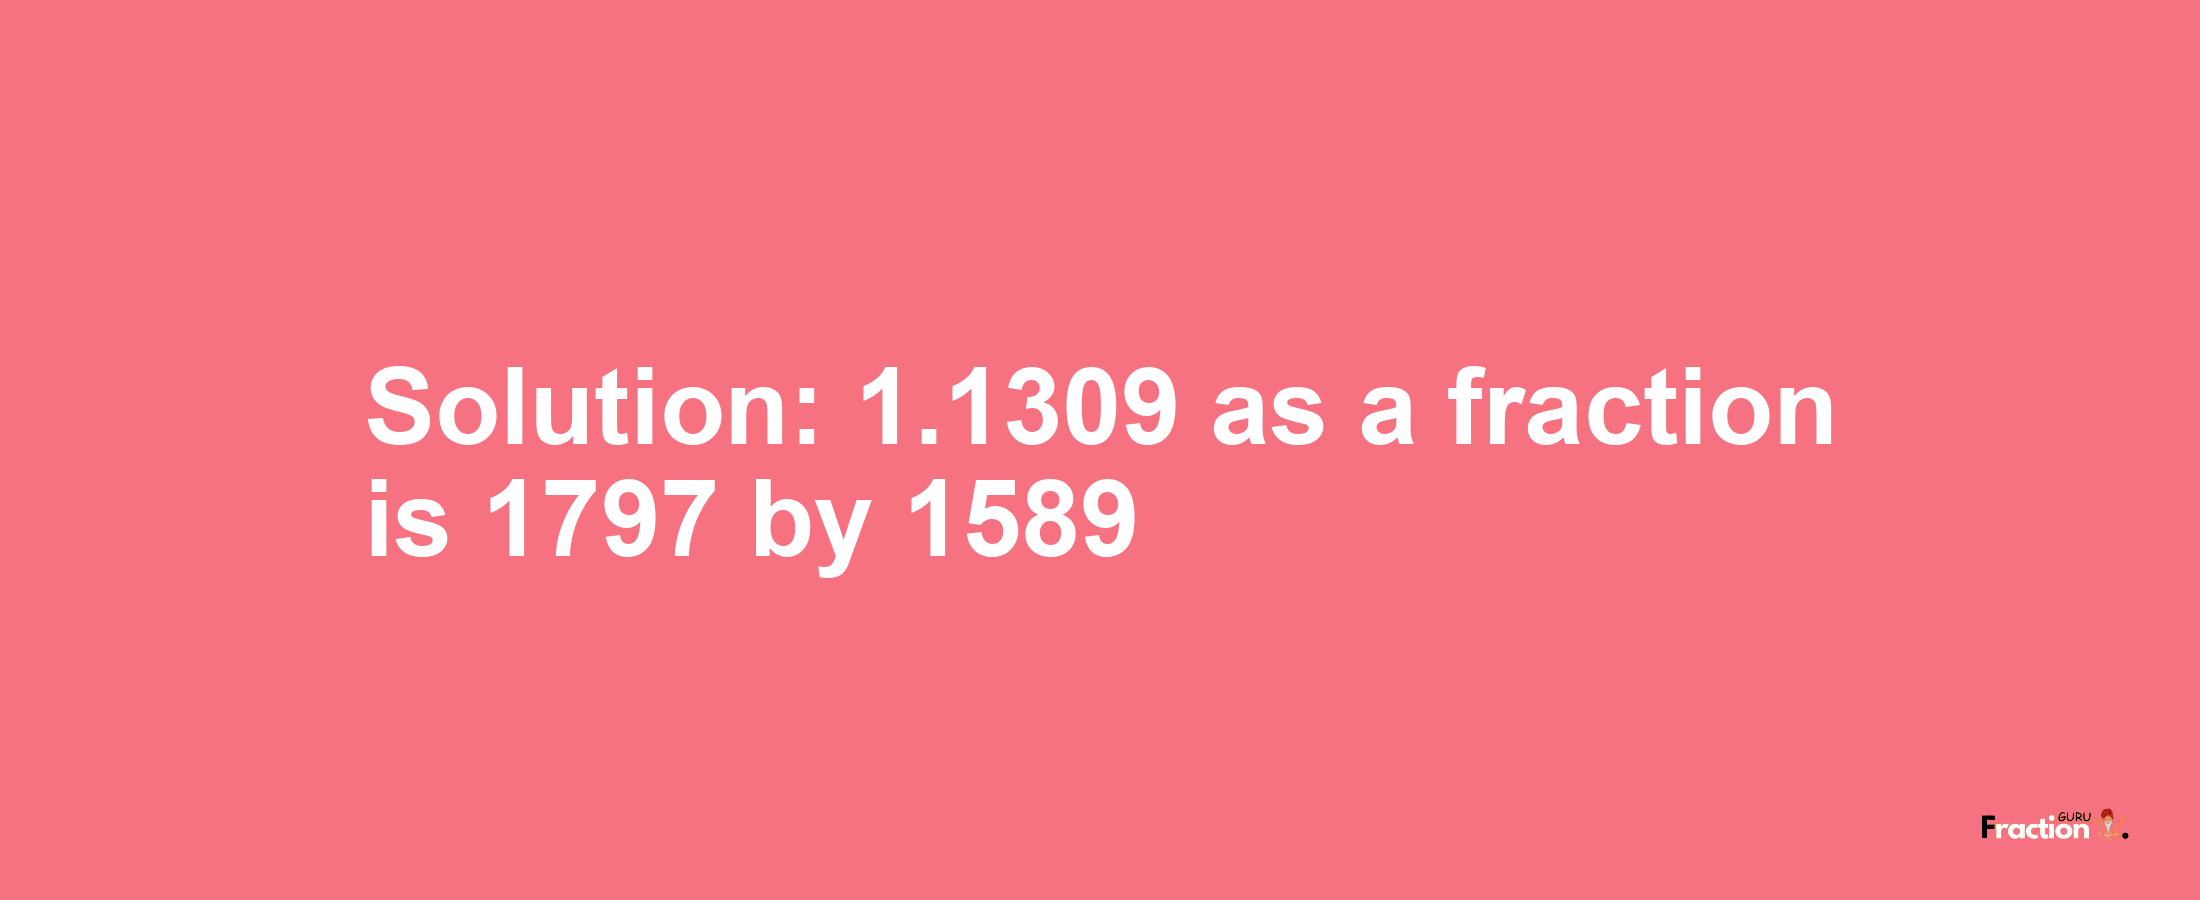 Solution:1.1309 as a fraction is 1797/1589